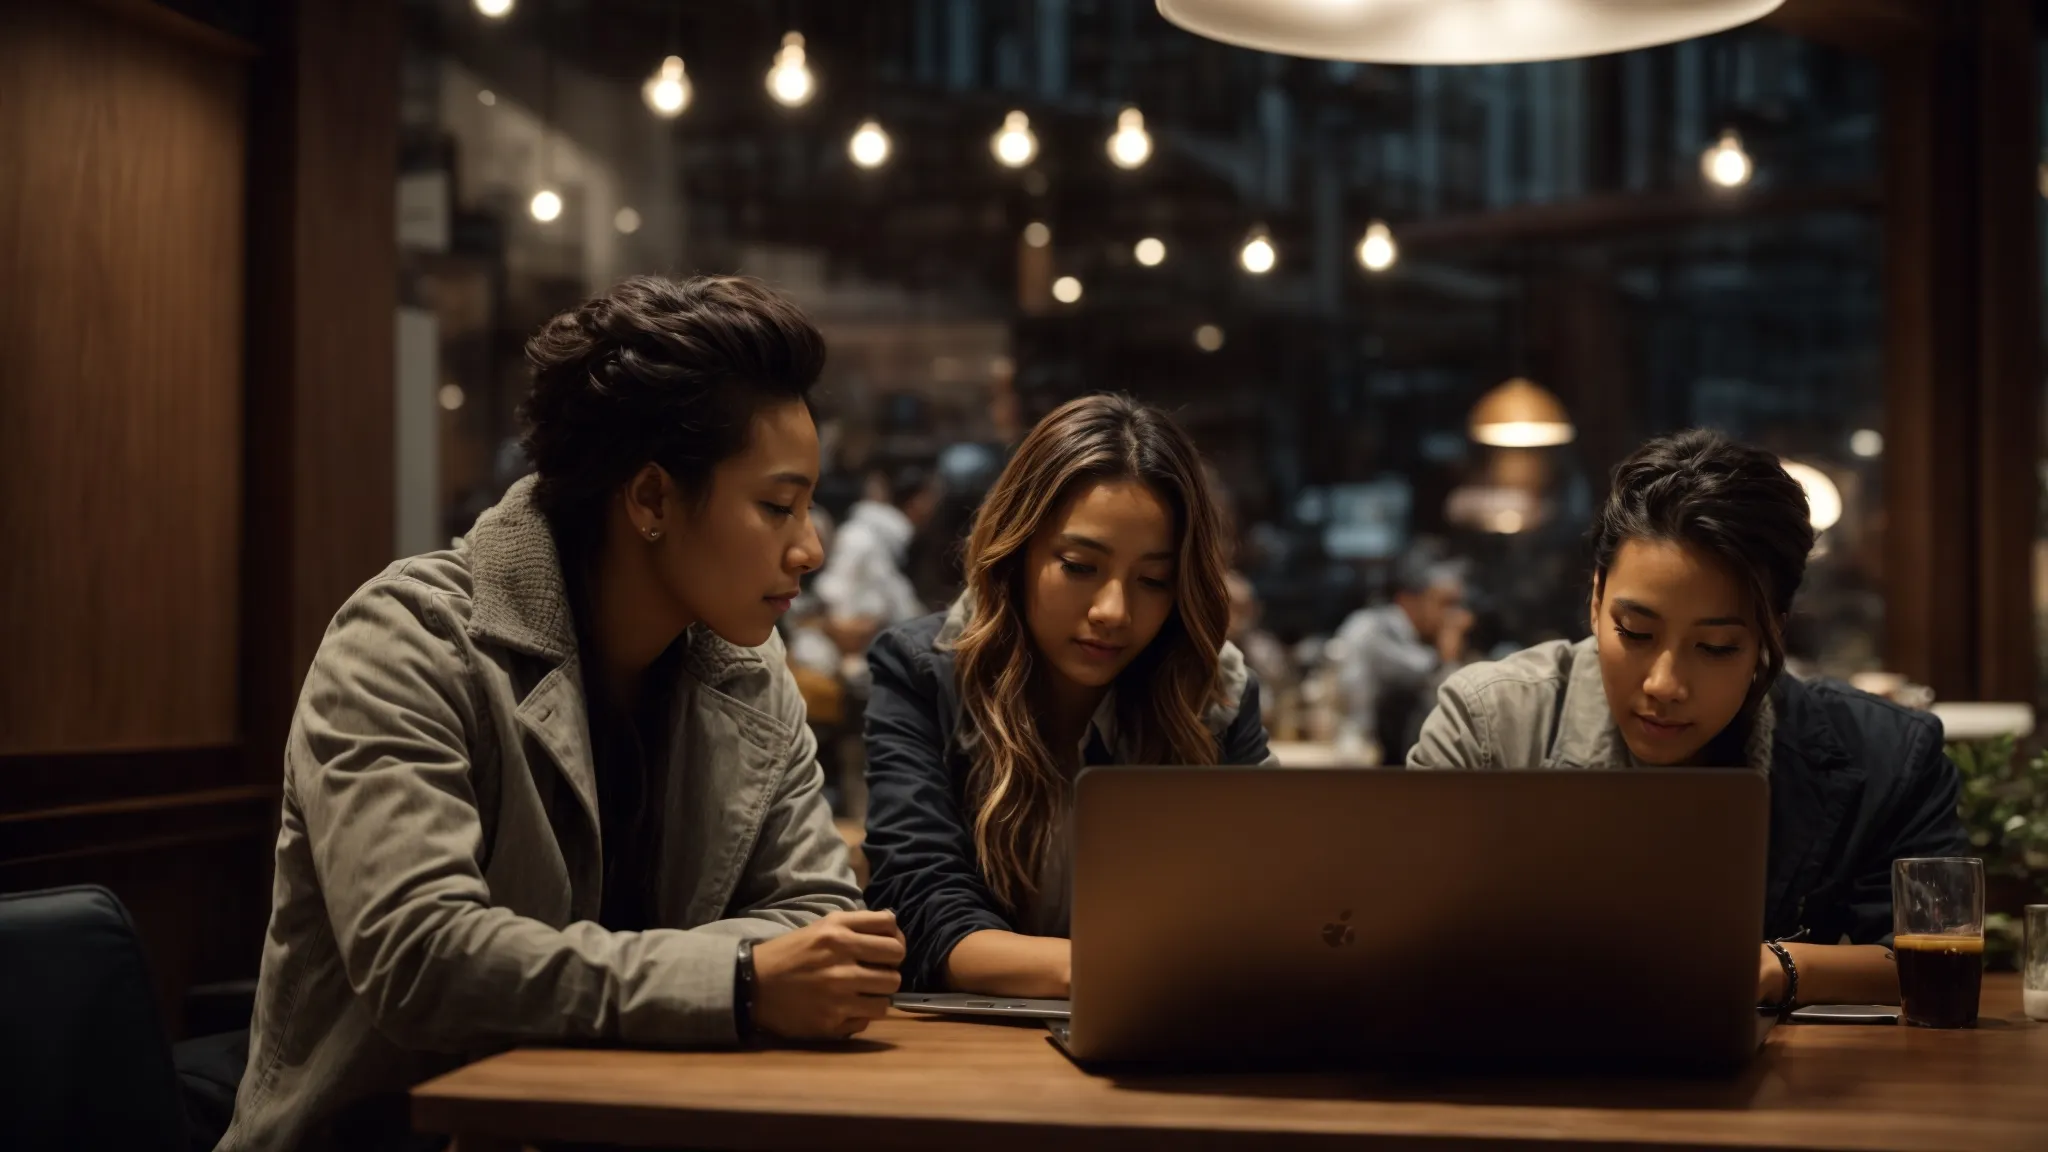 a group of entrepreneurs brainstorming around a laptop in a cozy cafe.